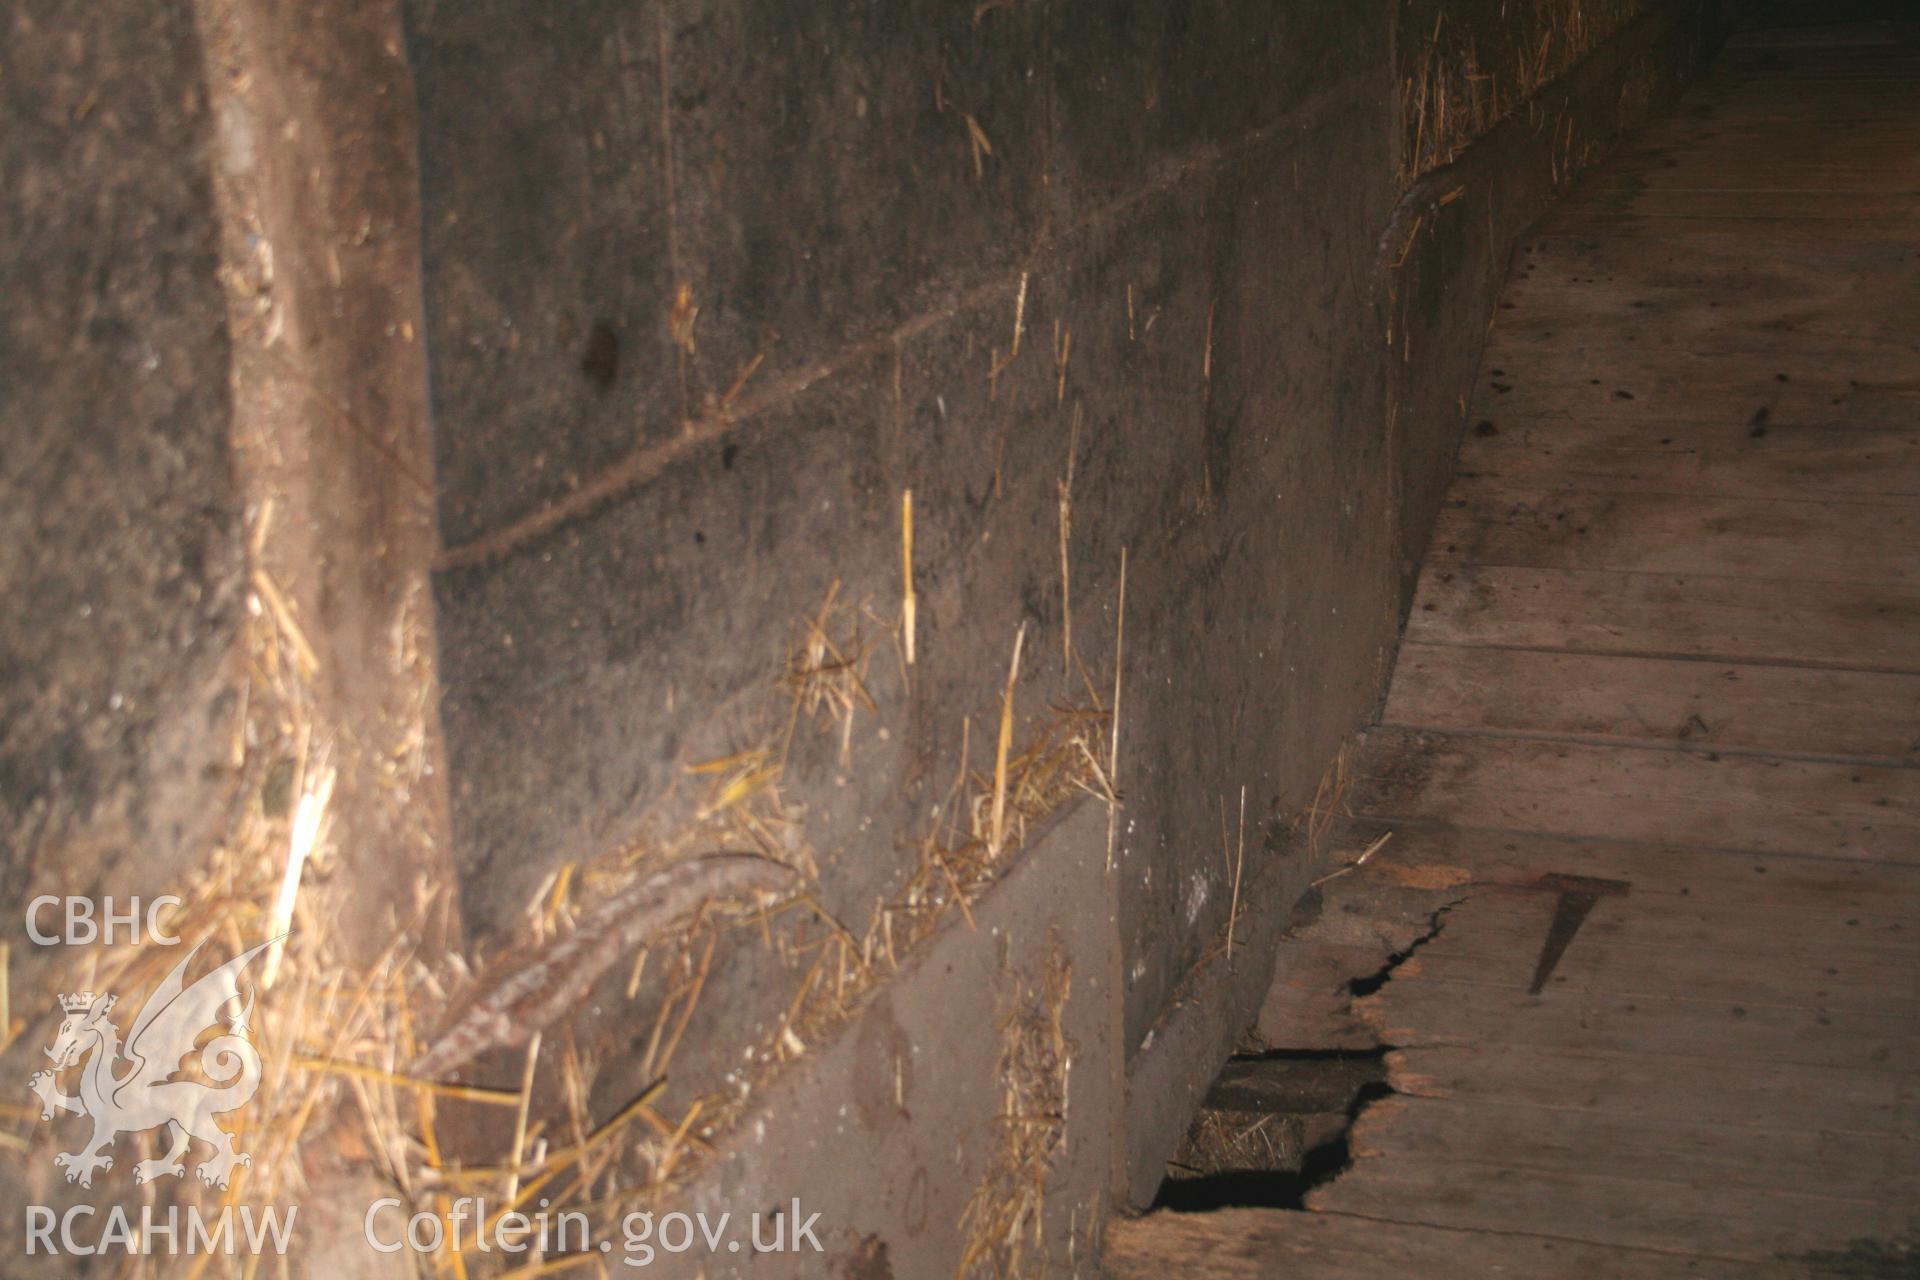 Interior view of wooden floorboards. Photographic survey of the northern range of cattle-shelters at Tan-y-Graig Farm, Llanfarian, conducted by Geoff Ward and John Wiles, 11th December 2006.